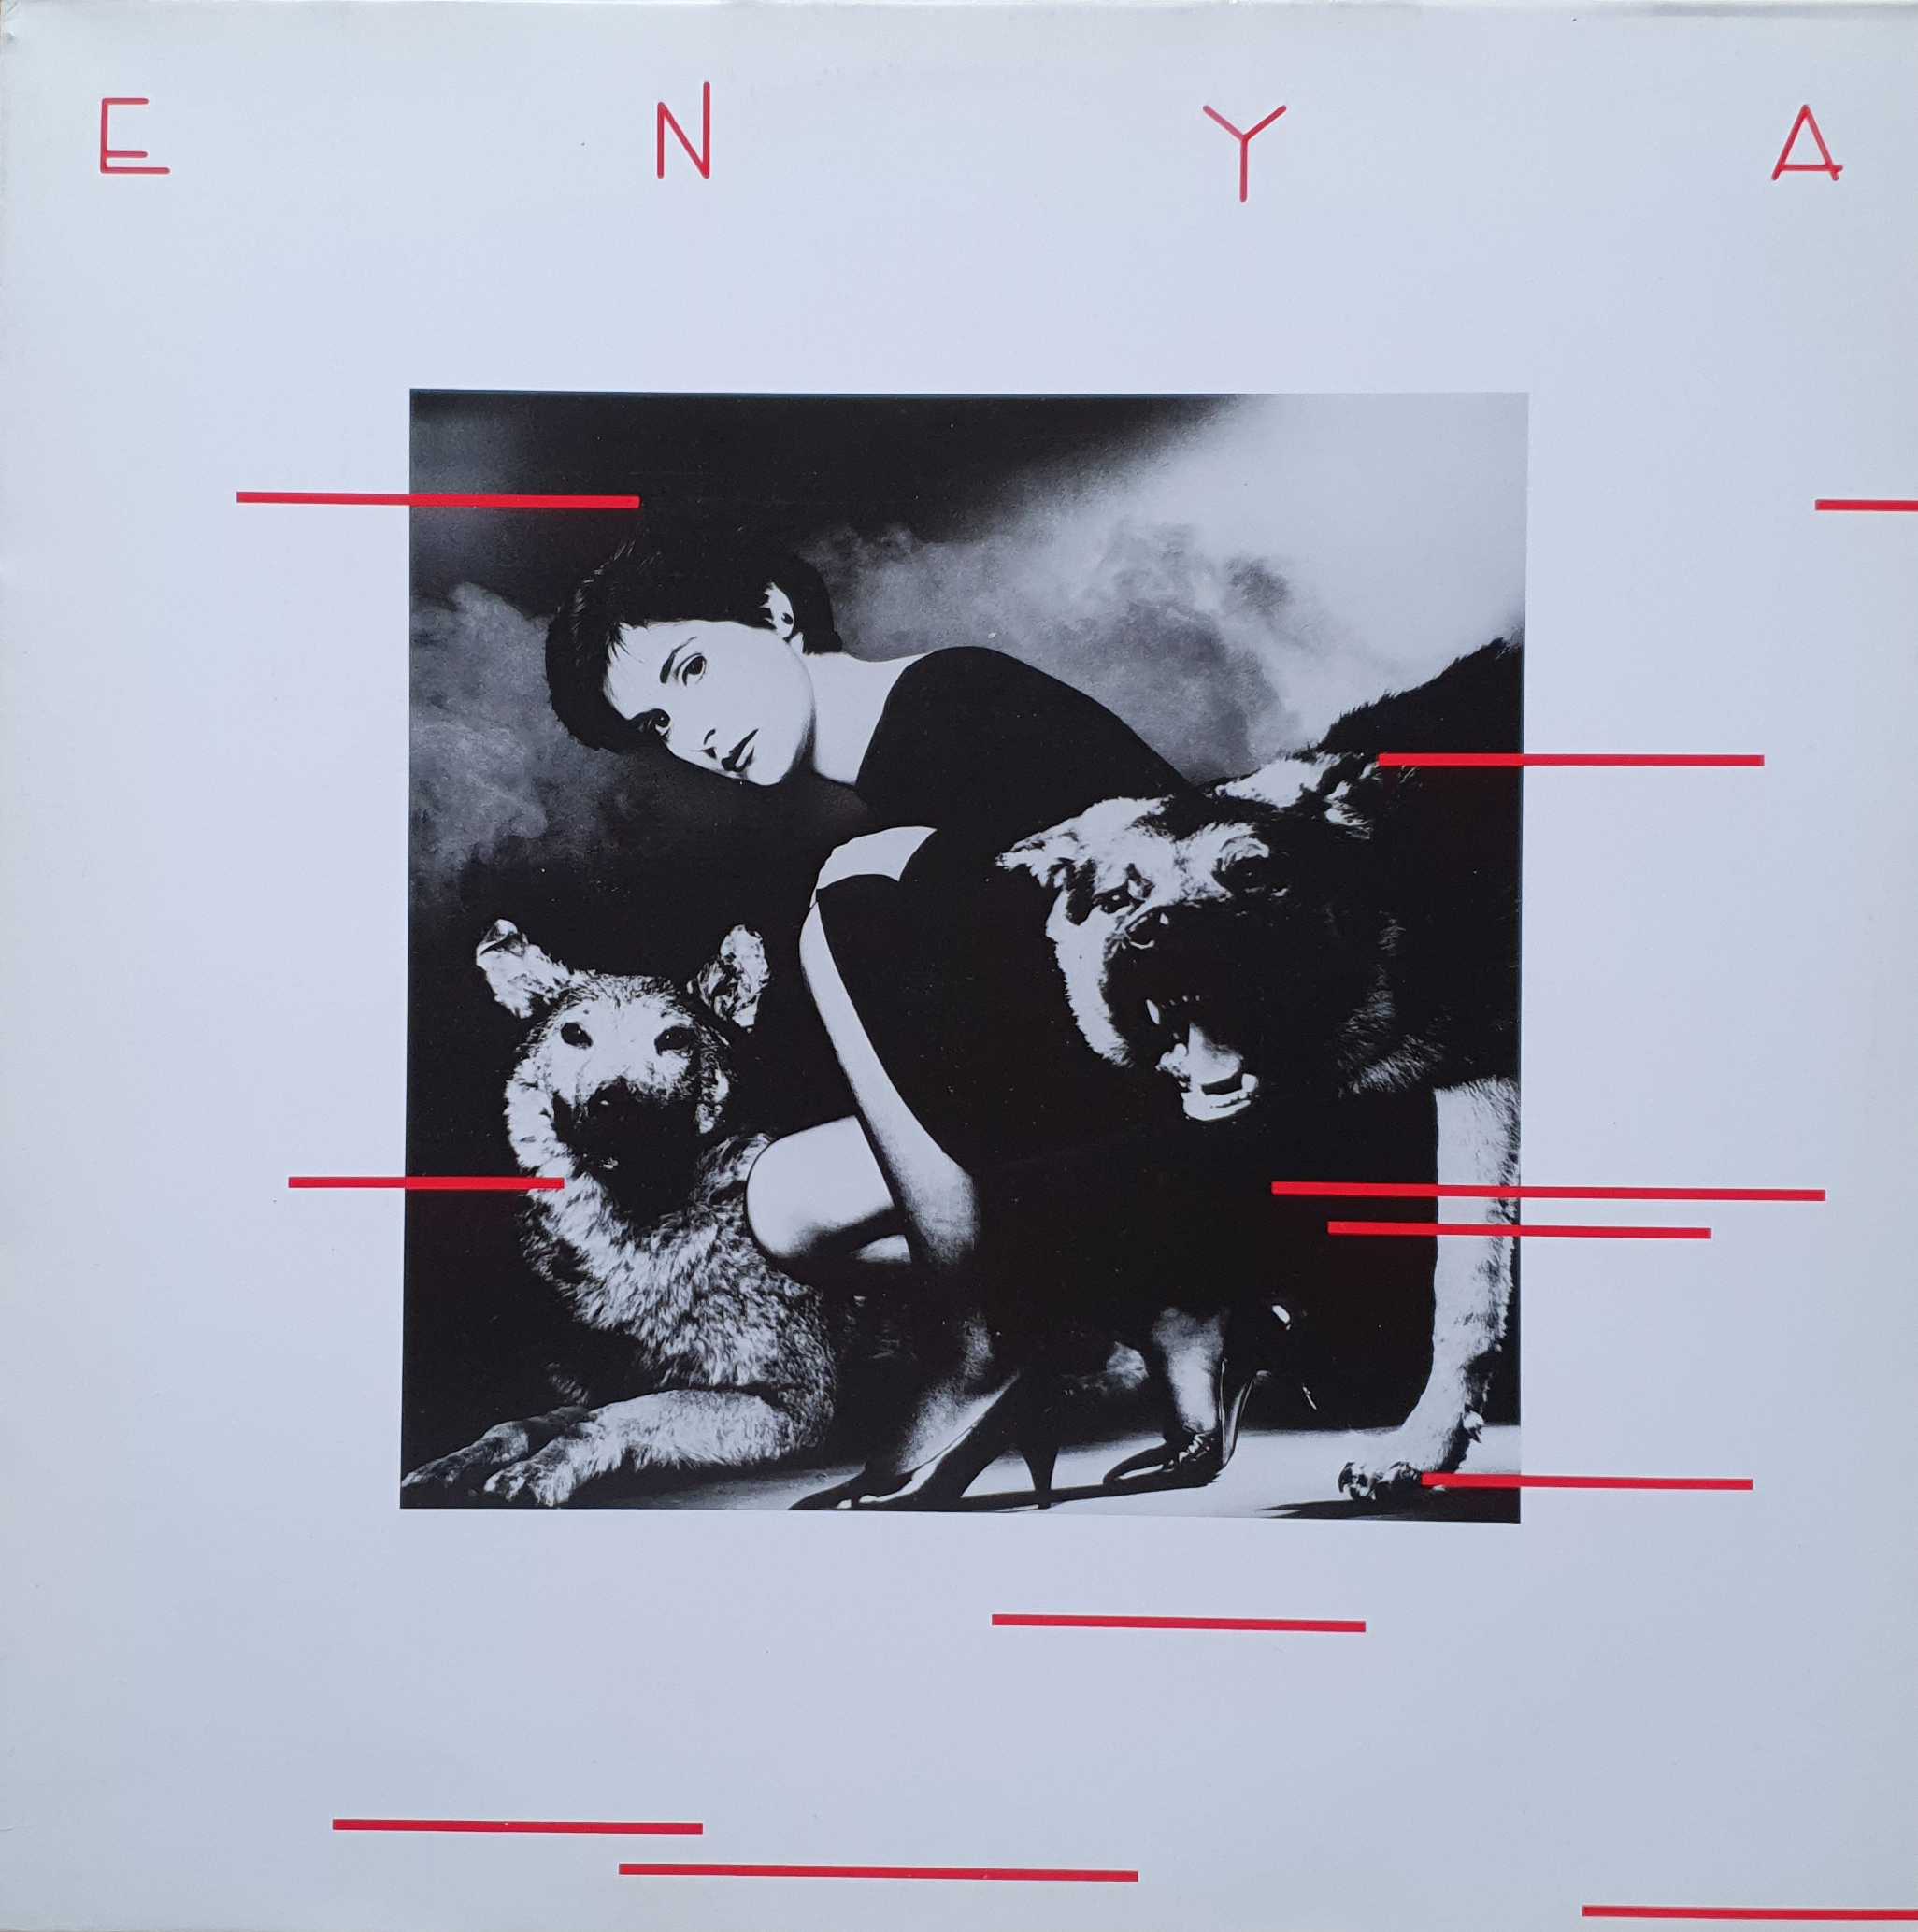 Picture of Enya by artist Enya from the BBC albums - Records and Tapes library